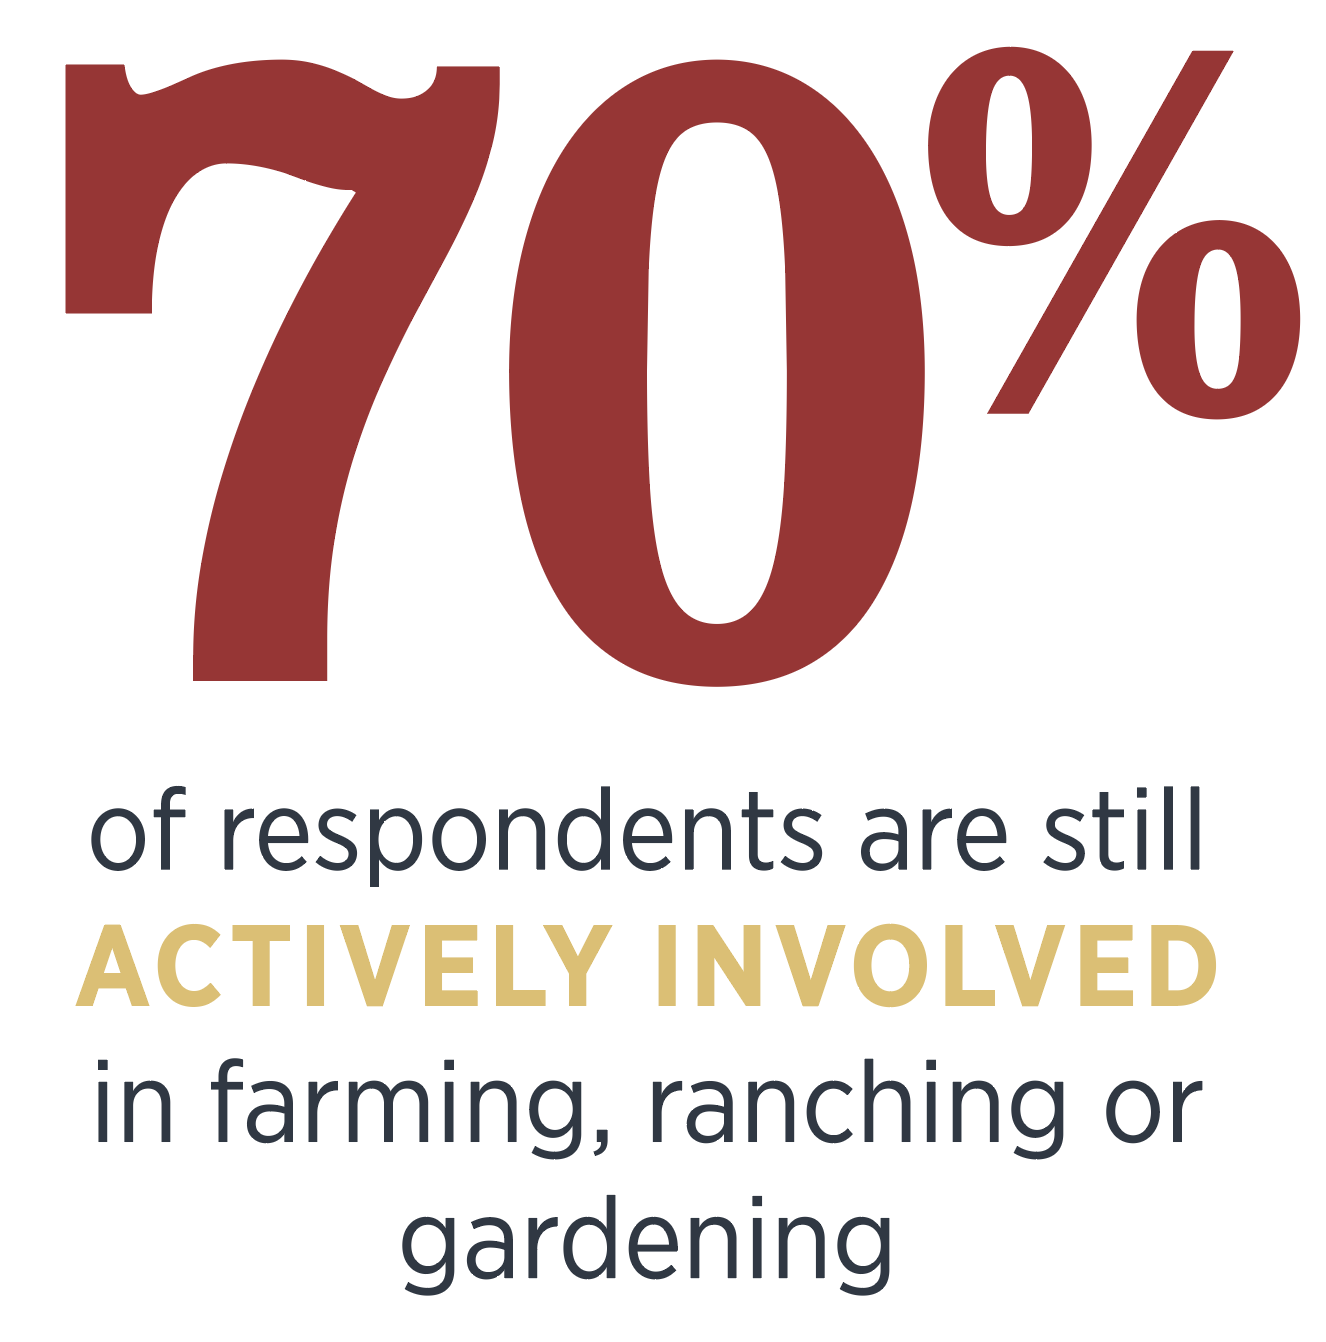 70% of respondents are still actively involved in farming, ranching or gardening.